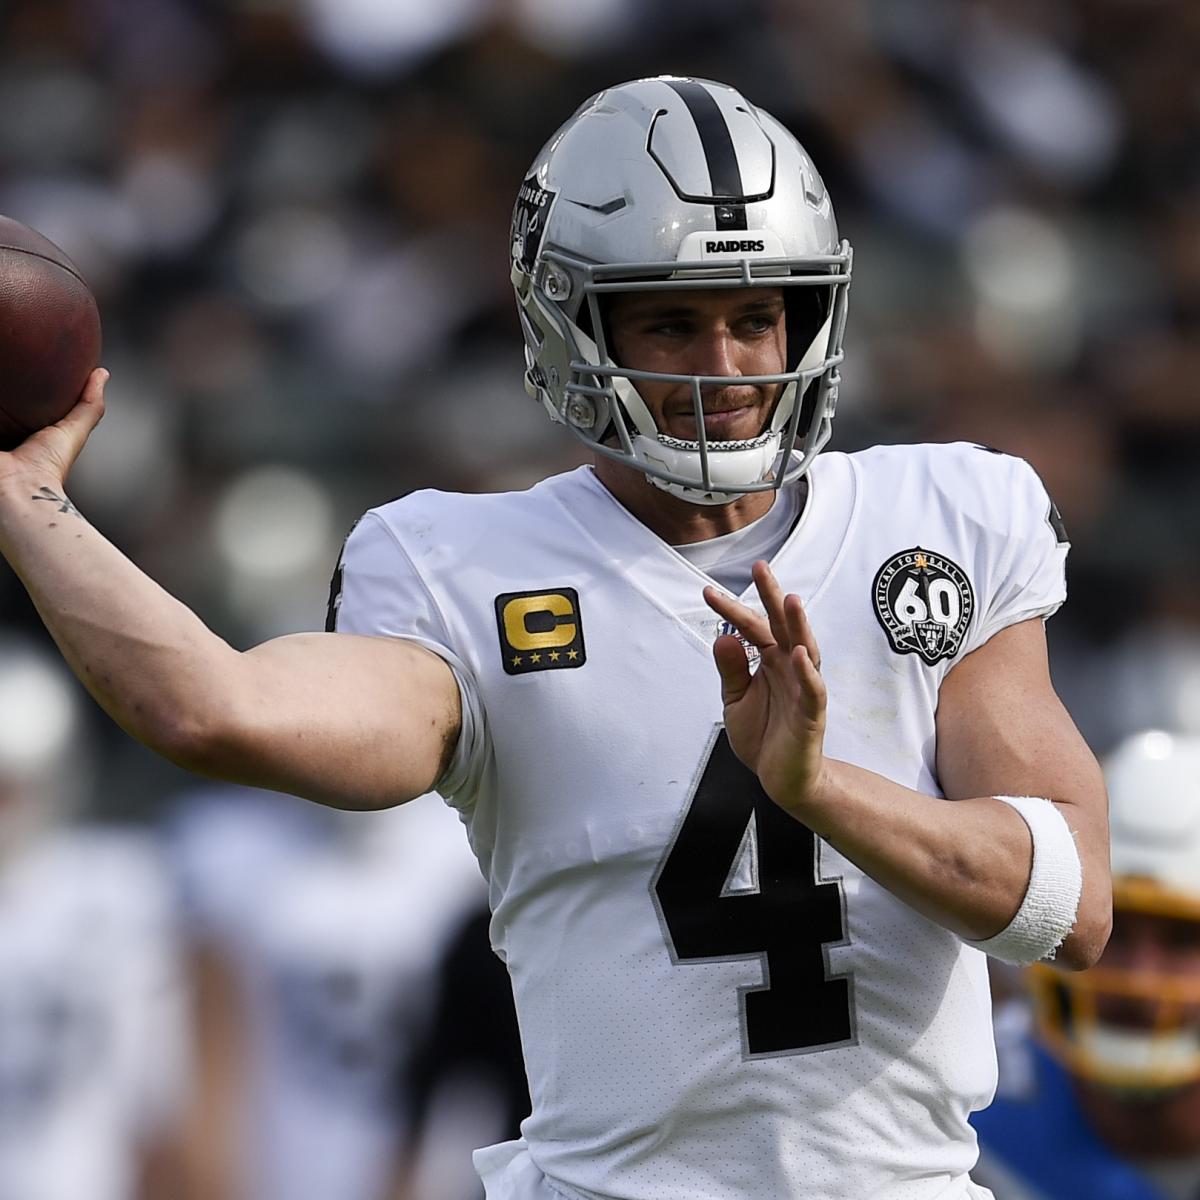 NFL Playoff Scenarios 2020: Complete Bracket Picture and 